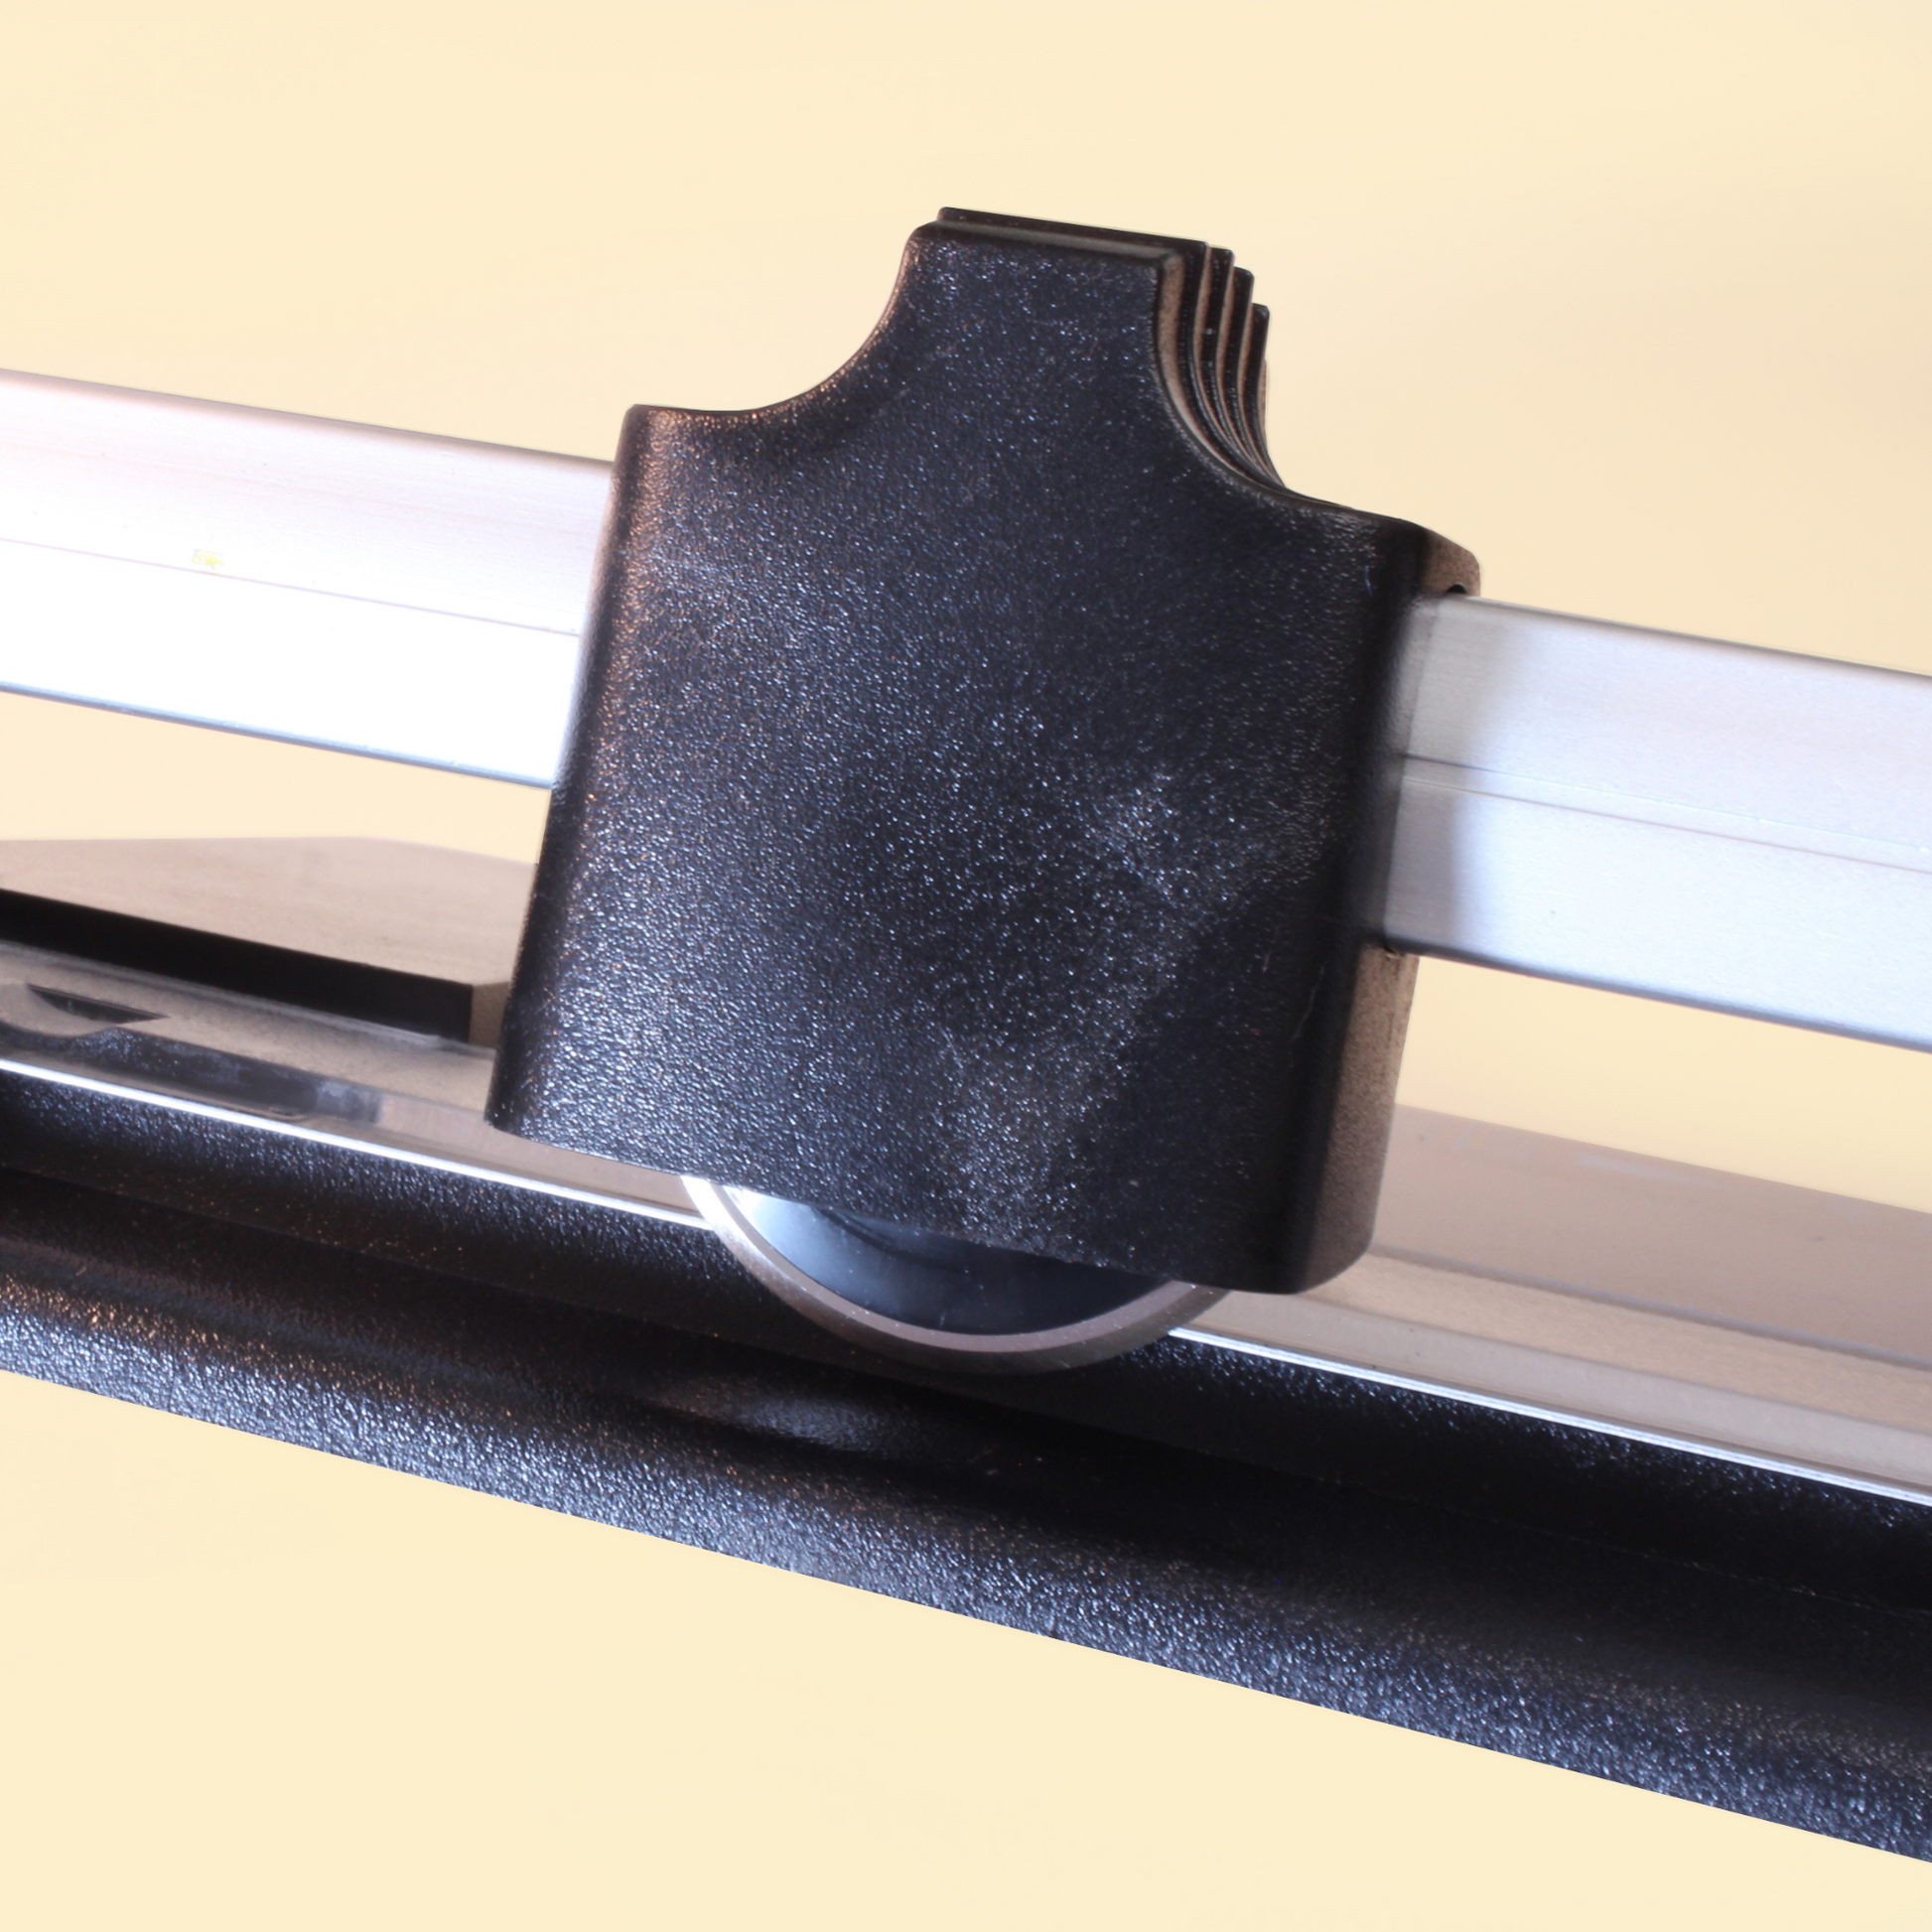 Close-up of the black cutting head on an A4 rotary paper trimmer, showing the ridged edge for a firm grip and the circular blade beneath, set against the metal guide bar for precision in paper trimming.